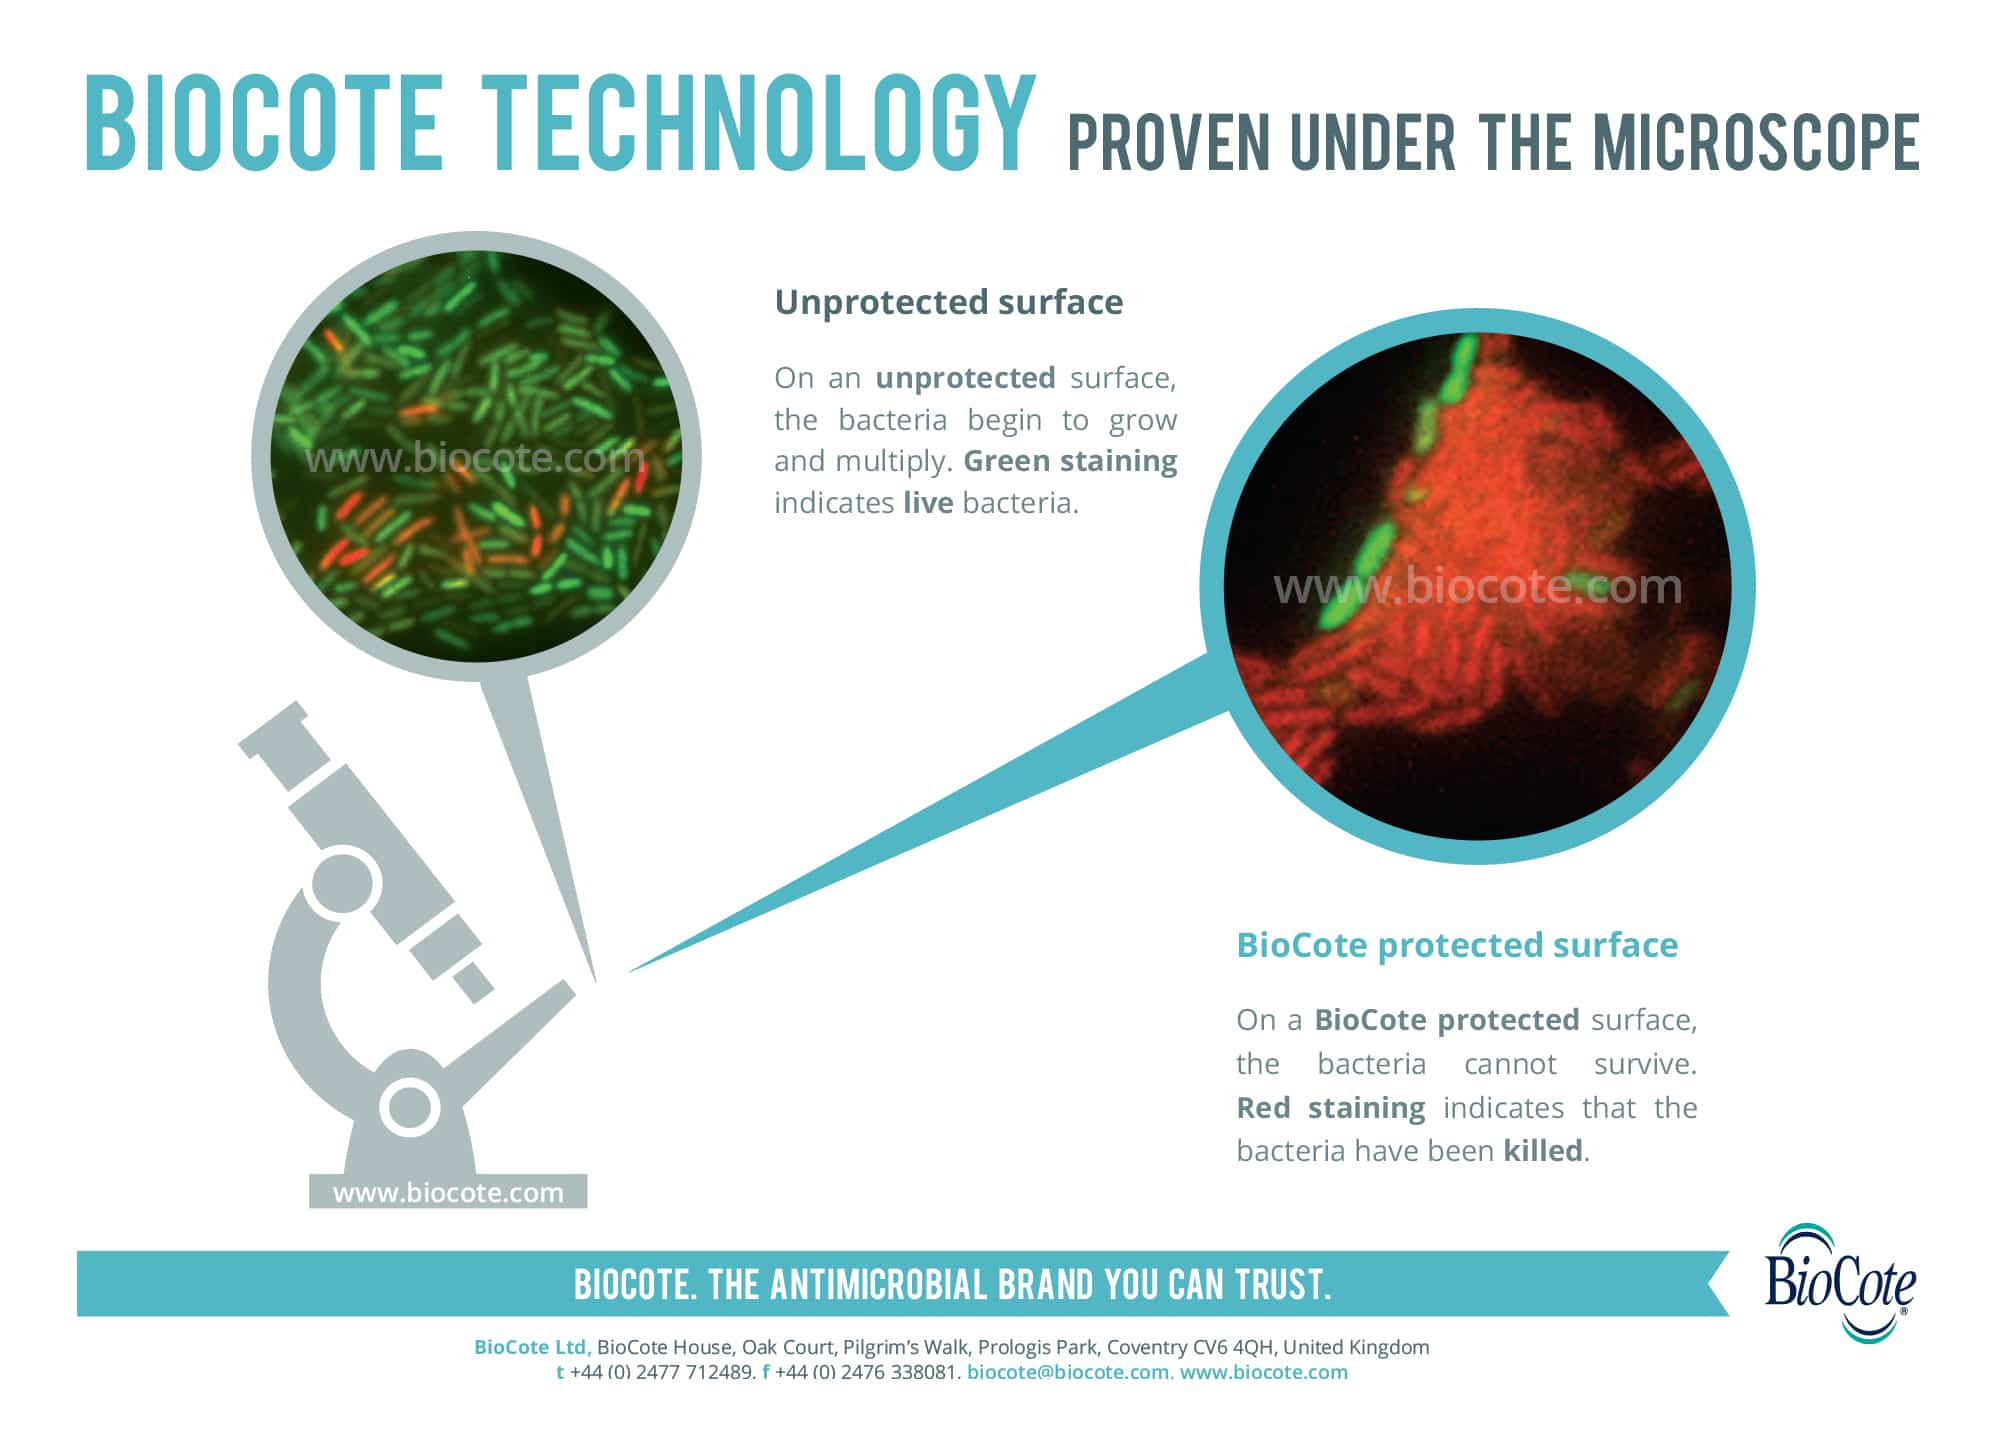 An infographic providing information on bacteria growth on unprotected surfaces vs BioCote protected surfaces.